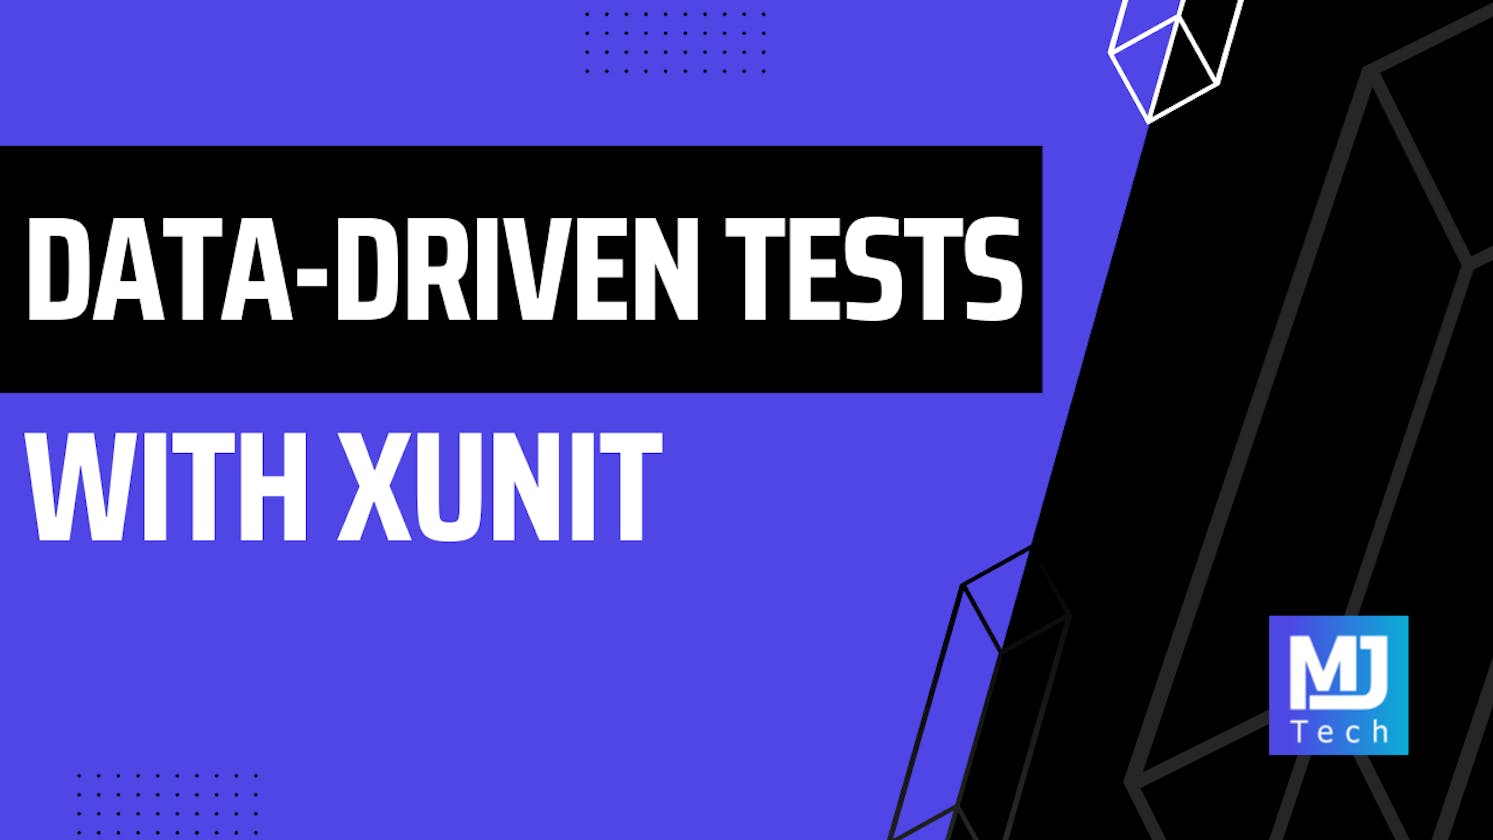 Creating Data-Driven Tests With xUnit